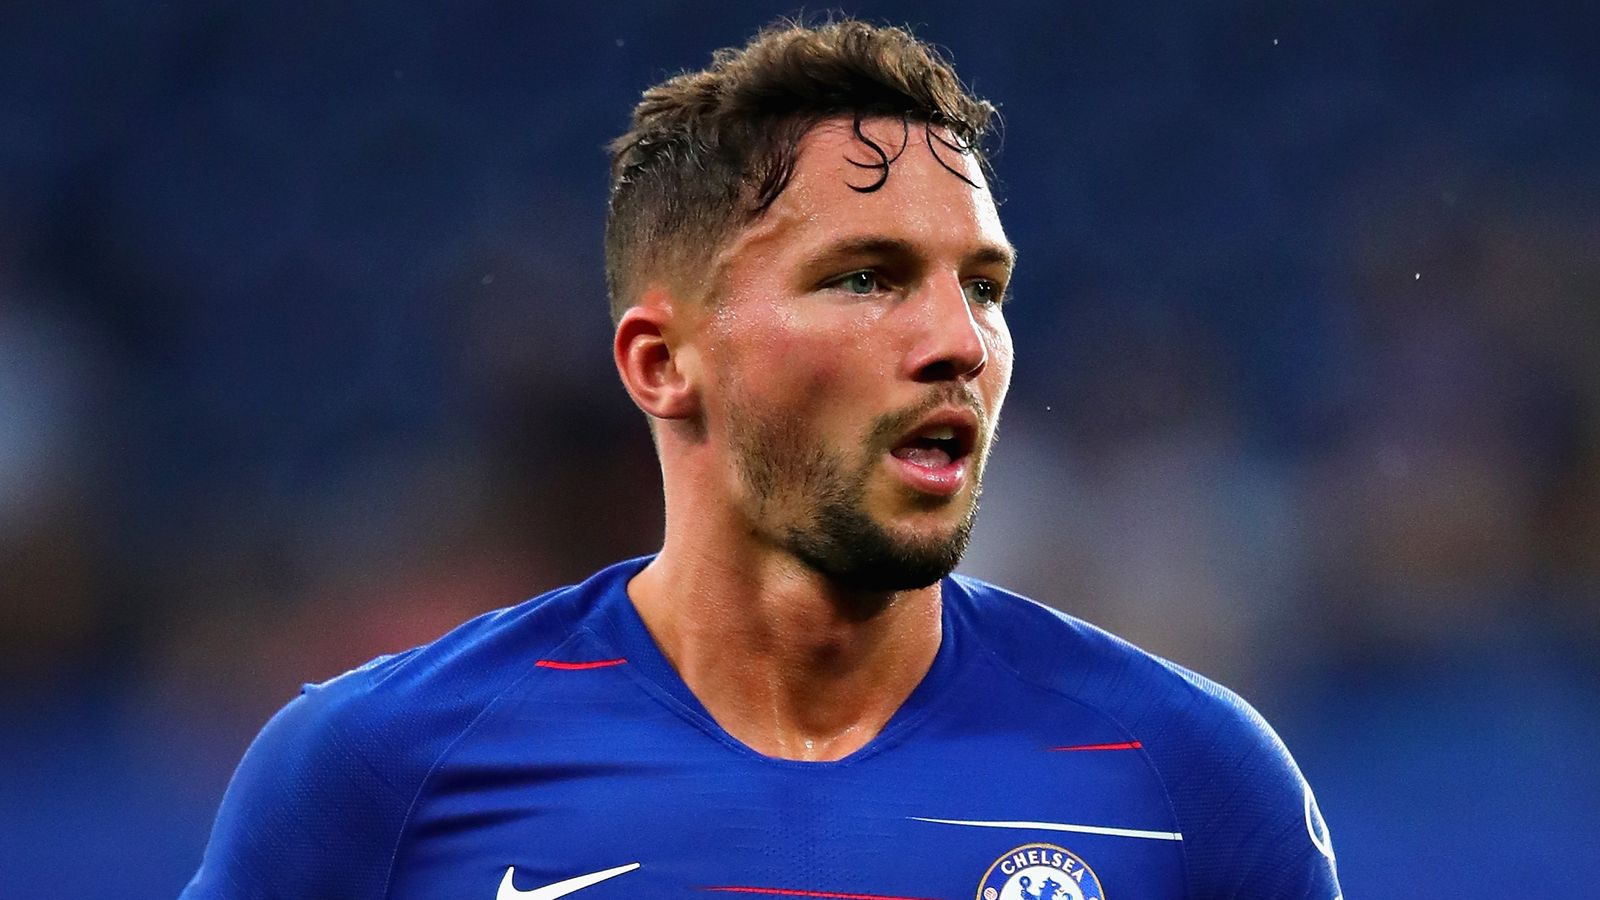 Danny Drinkwater on his Chelsea nightmare: ‘I wasted some of my best years’